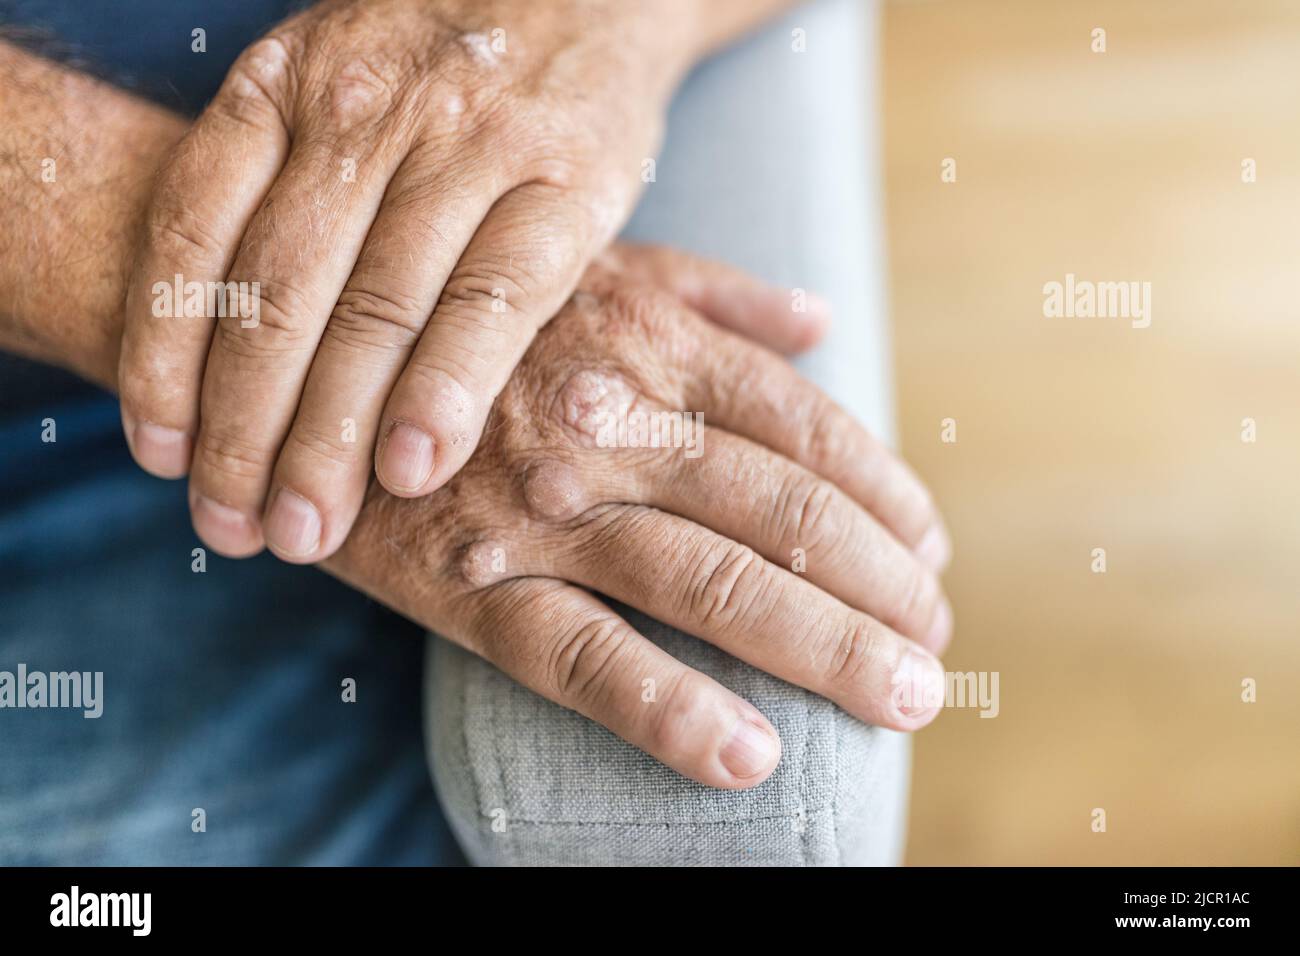 Elderly man suffering from psoriasis, closeup on hands Stock Photo